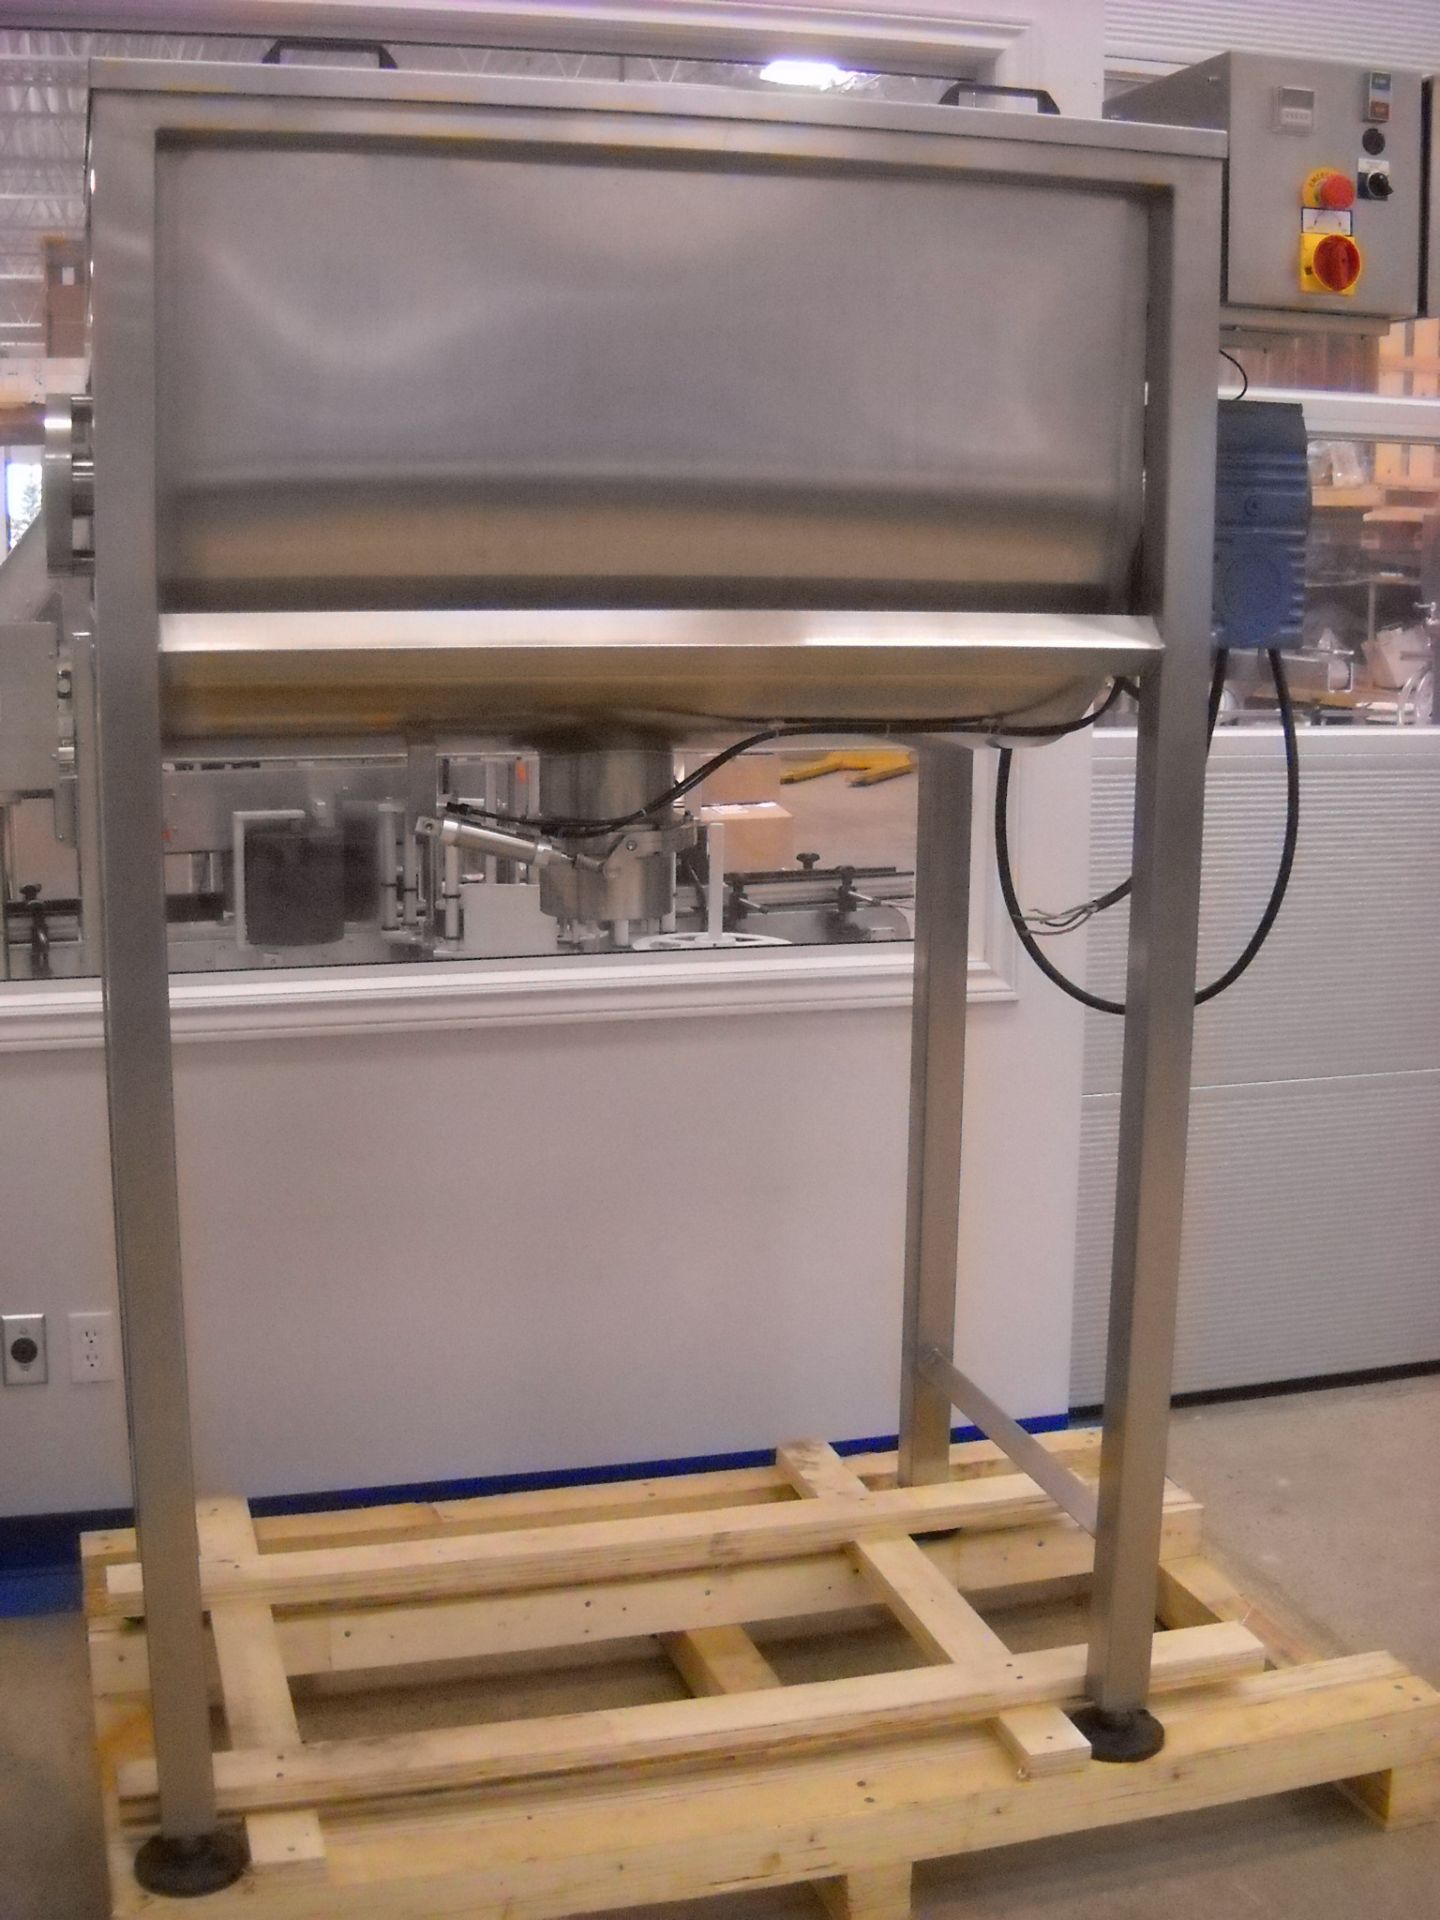 New Never Used 10 Cu Ft Ribbon Blender, 304 Stainless Steel. Electrics: 230V/3Ph/60Hz. Load Out